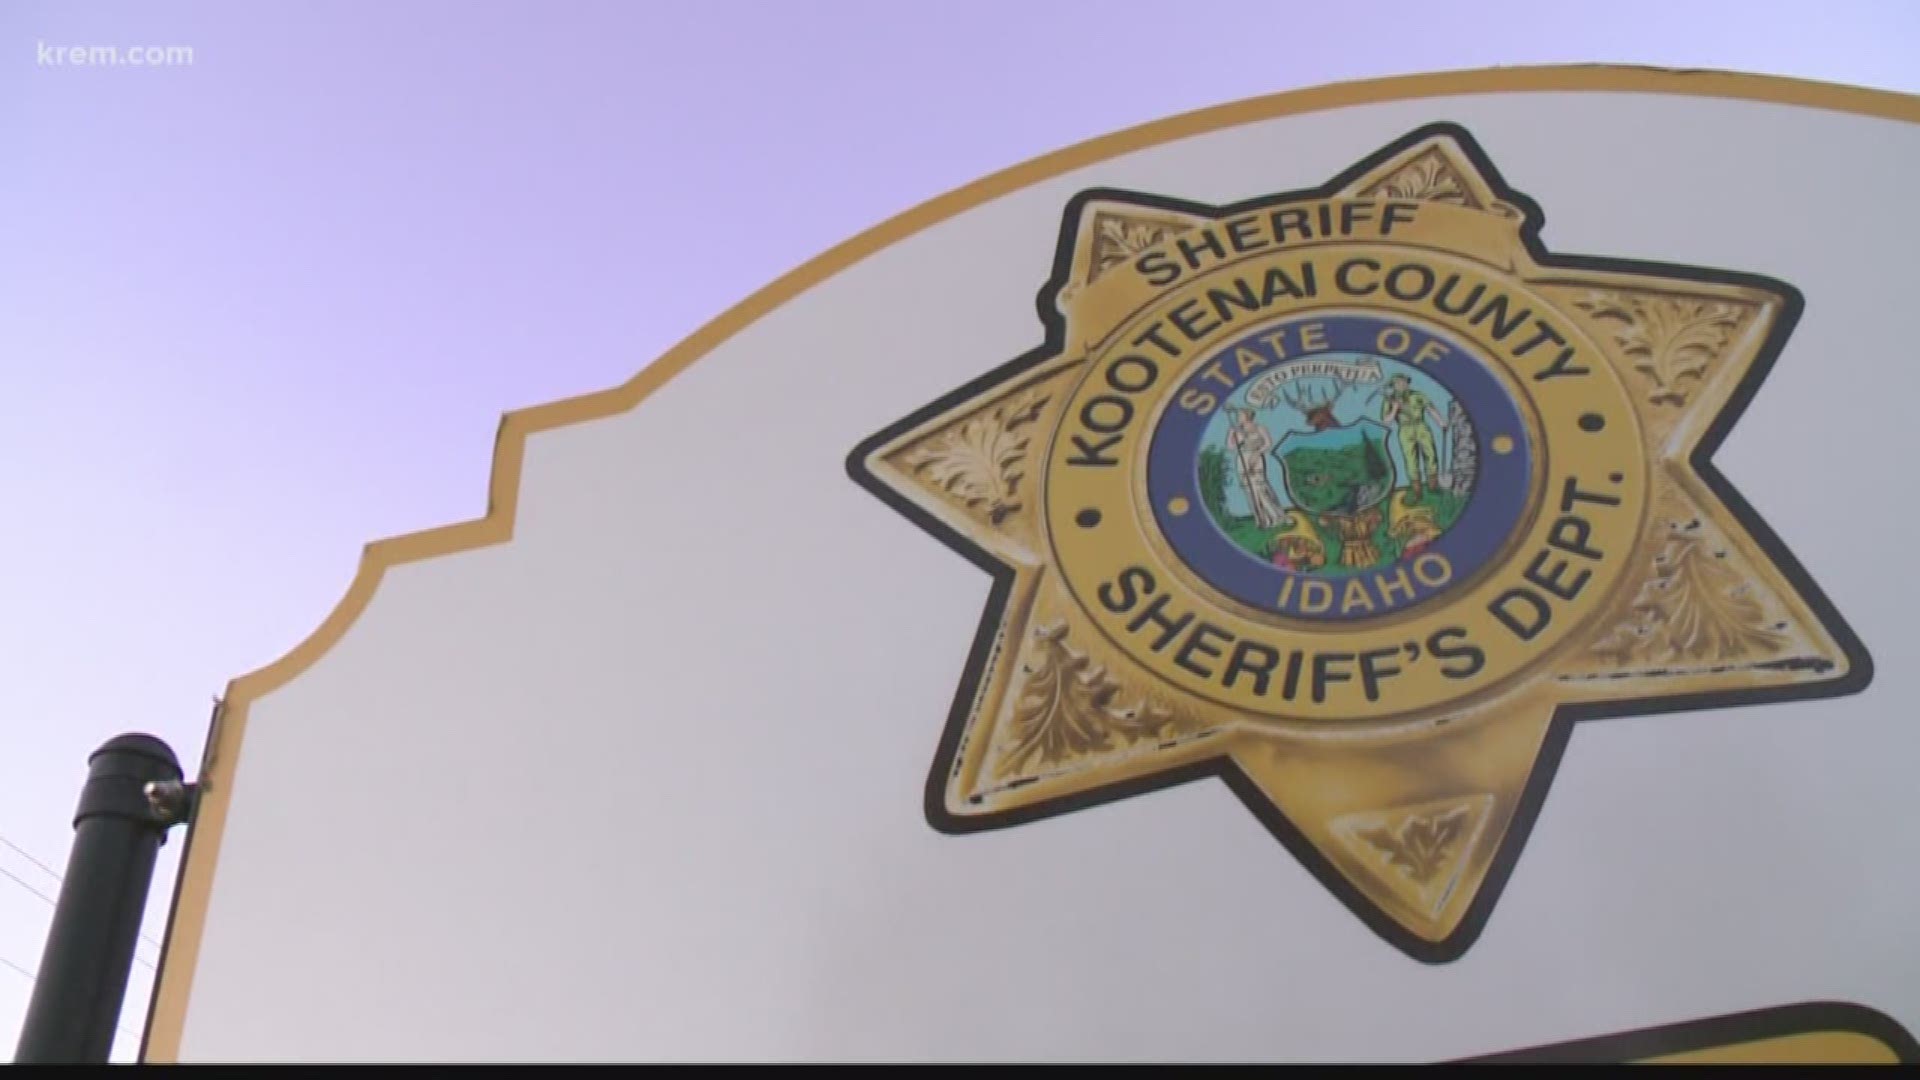 KREM Reporter Taylor Viydo spoke with the Kootenai County Sheriff, who says low wages is causing high staff turnover.